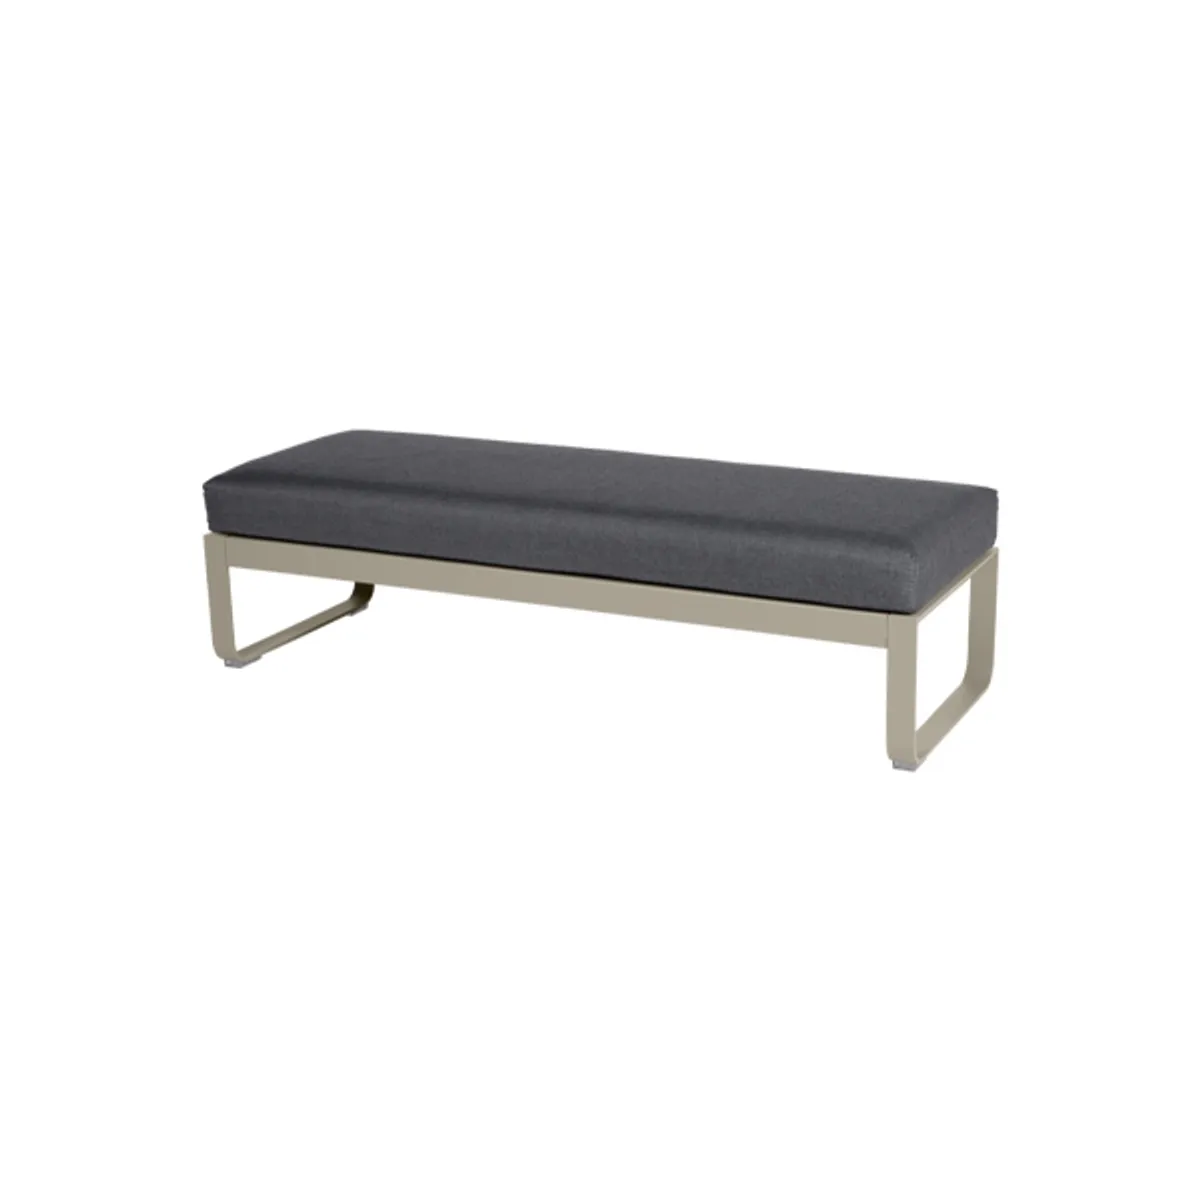 Bellevie large ottoman Inside Out Contracts4